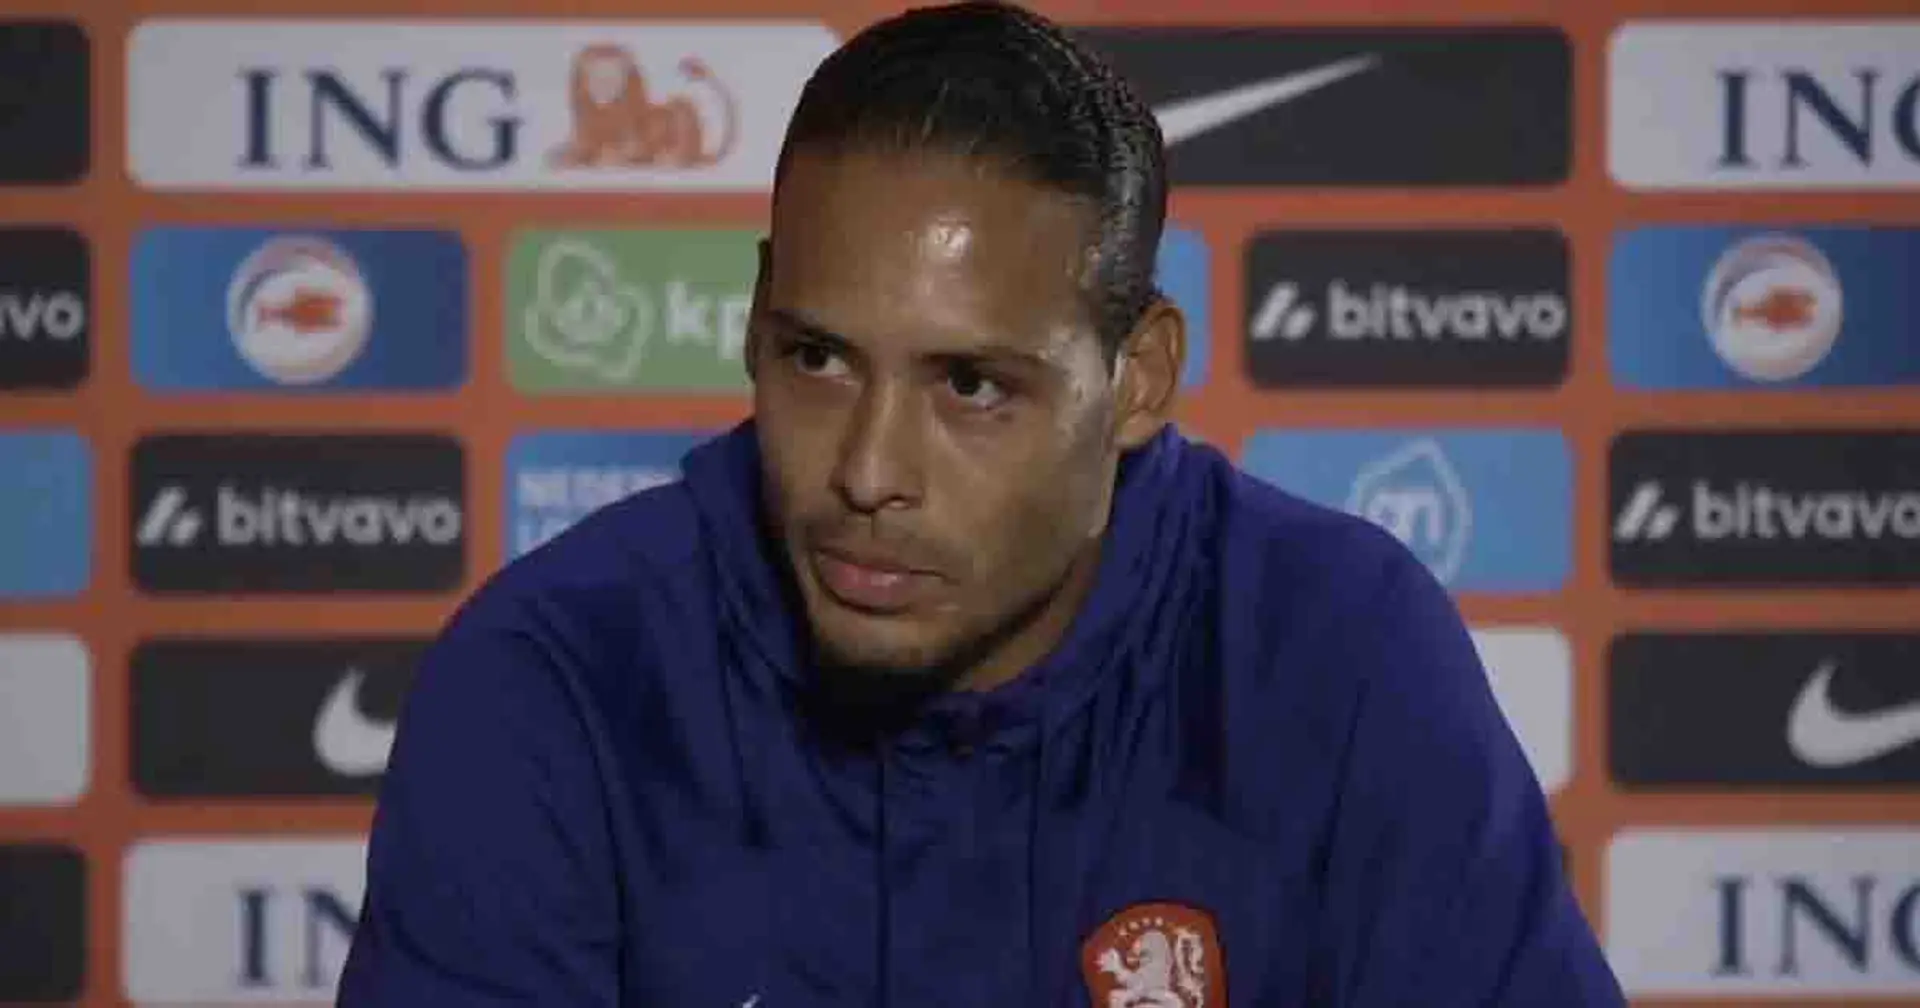 'I will not wear the One Love armband': Van Dijk reveals disgruntled stance before France clash